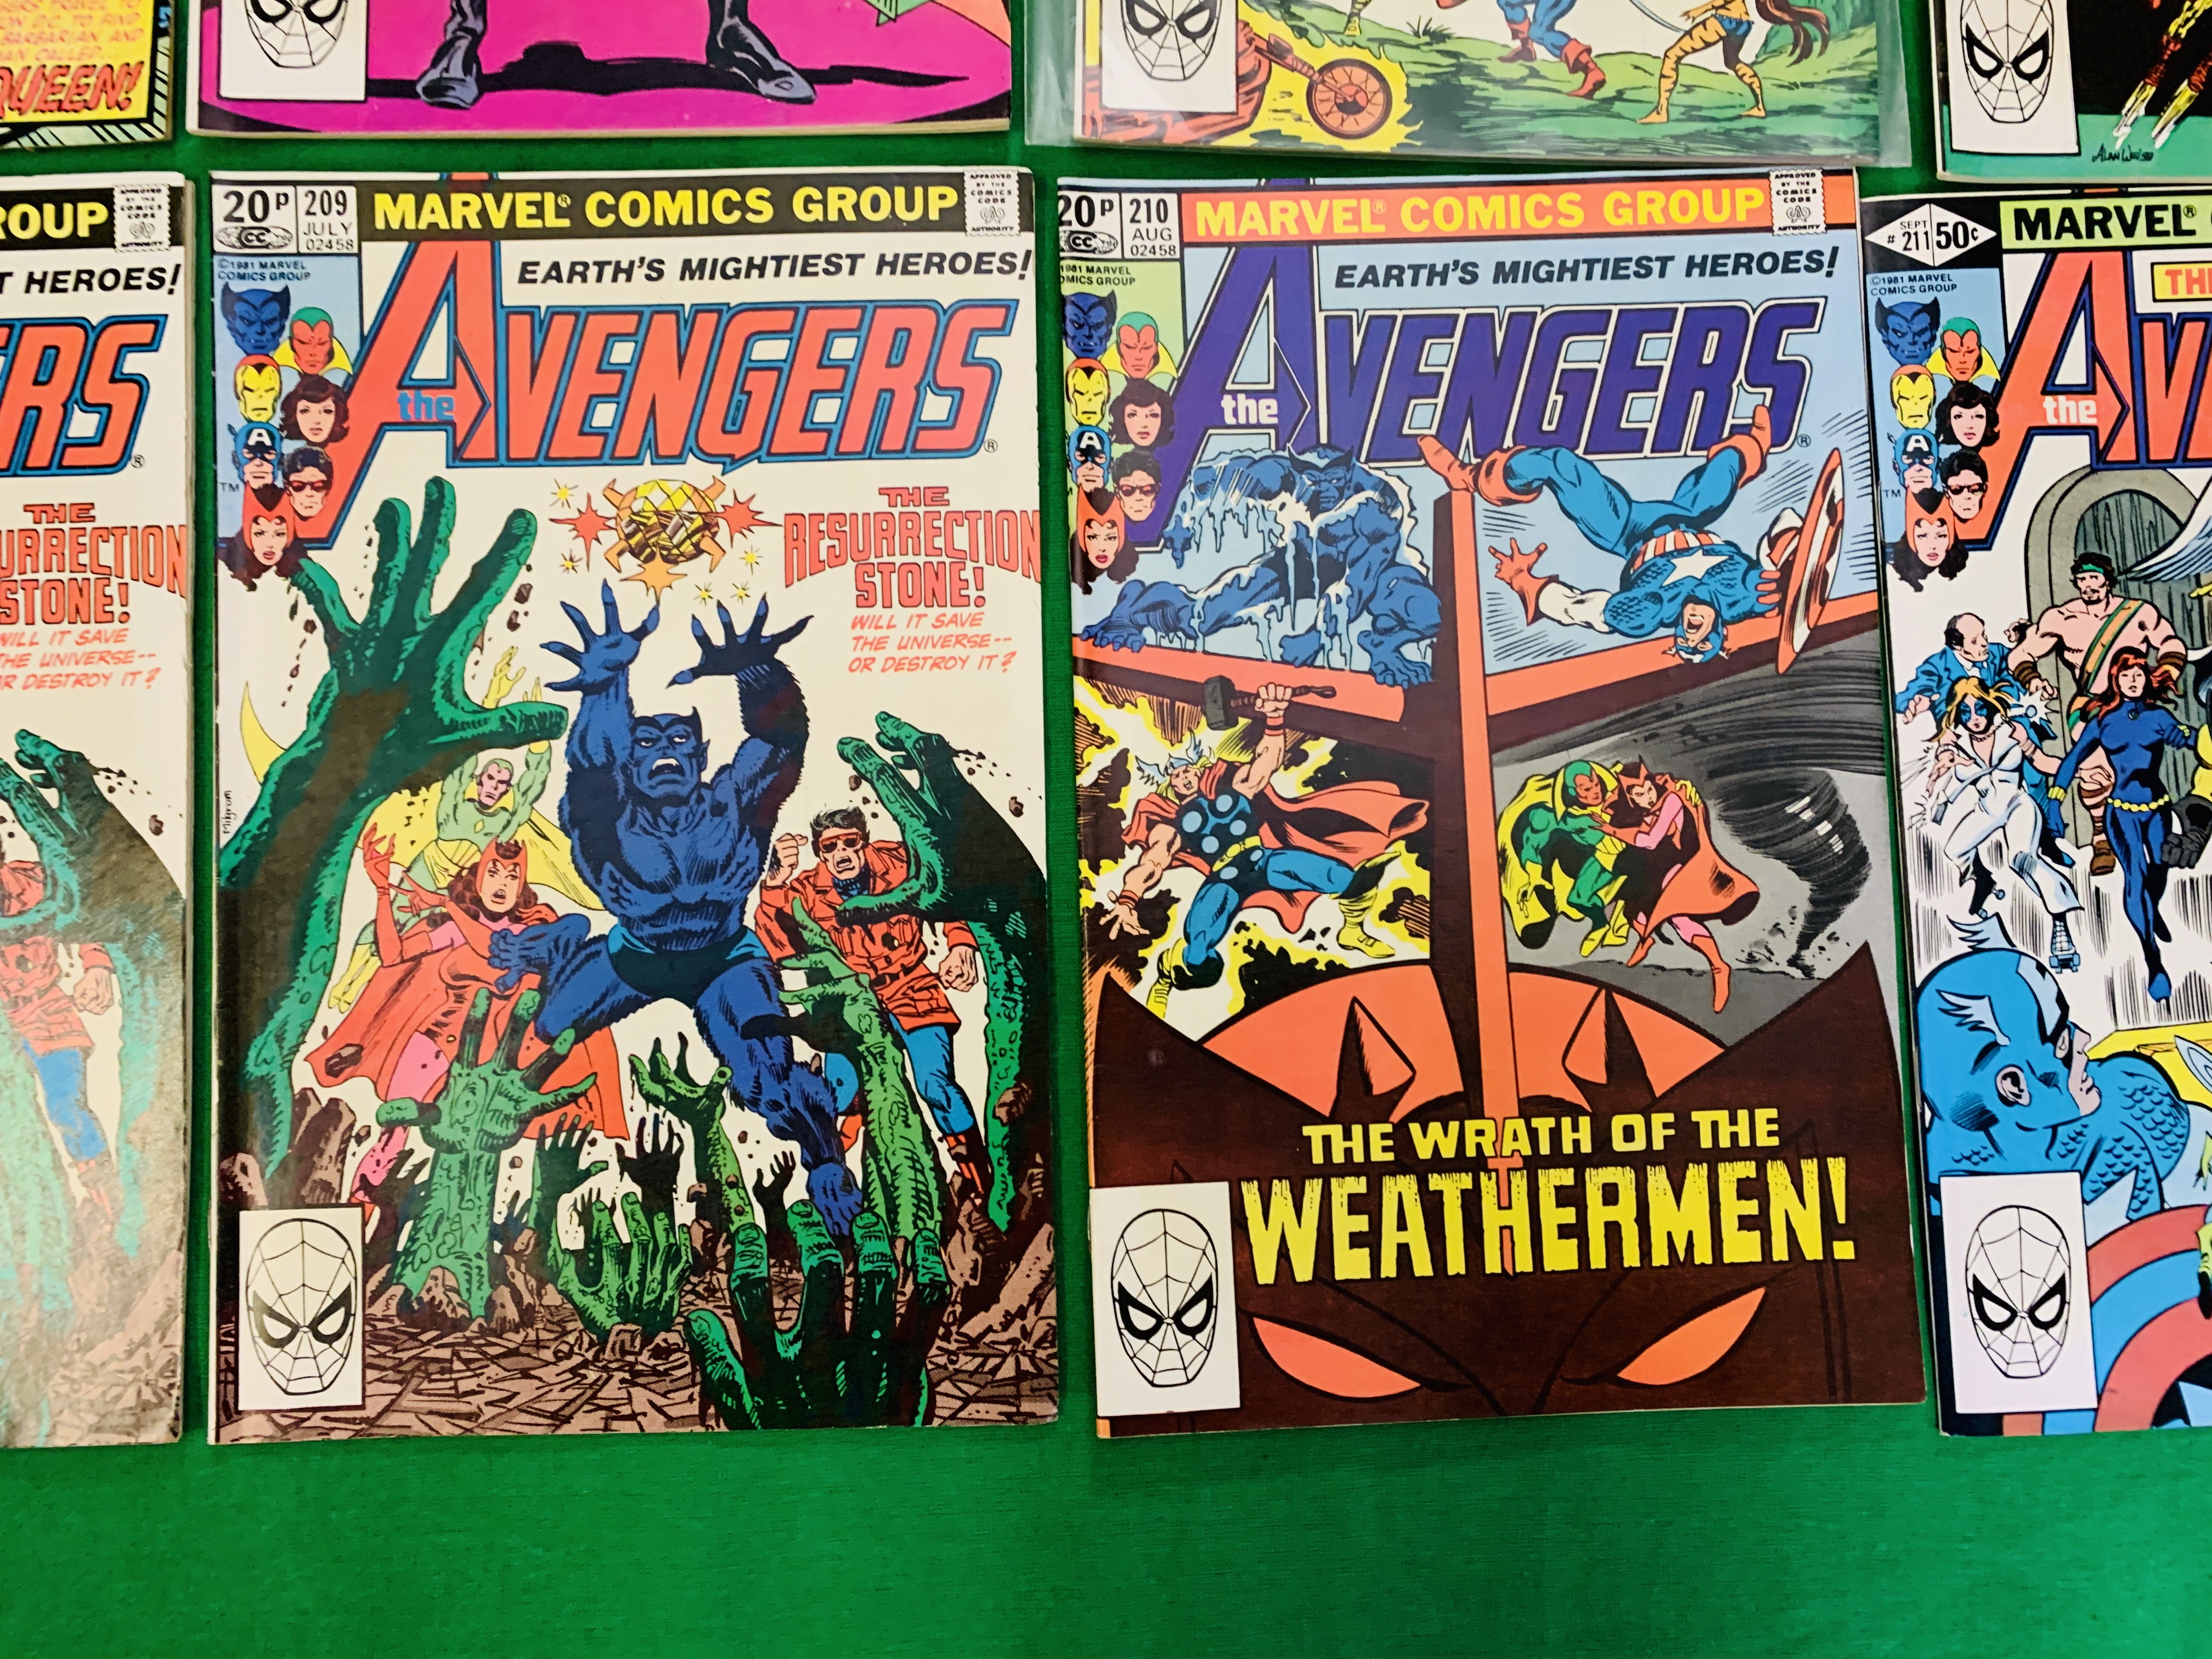 MARVEL COMICS THE AVENGERS NO. 101 - 299, MISSING ISSUES 103 AND 110. - Image 79 of 130